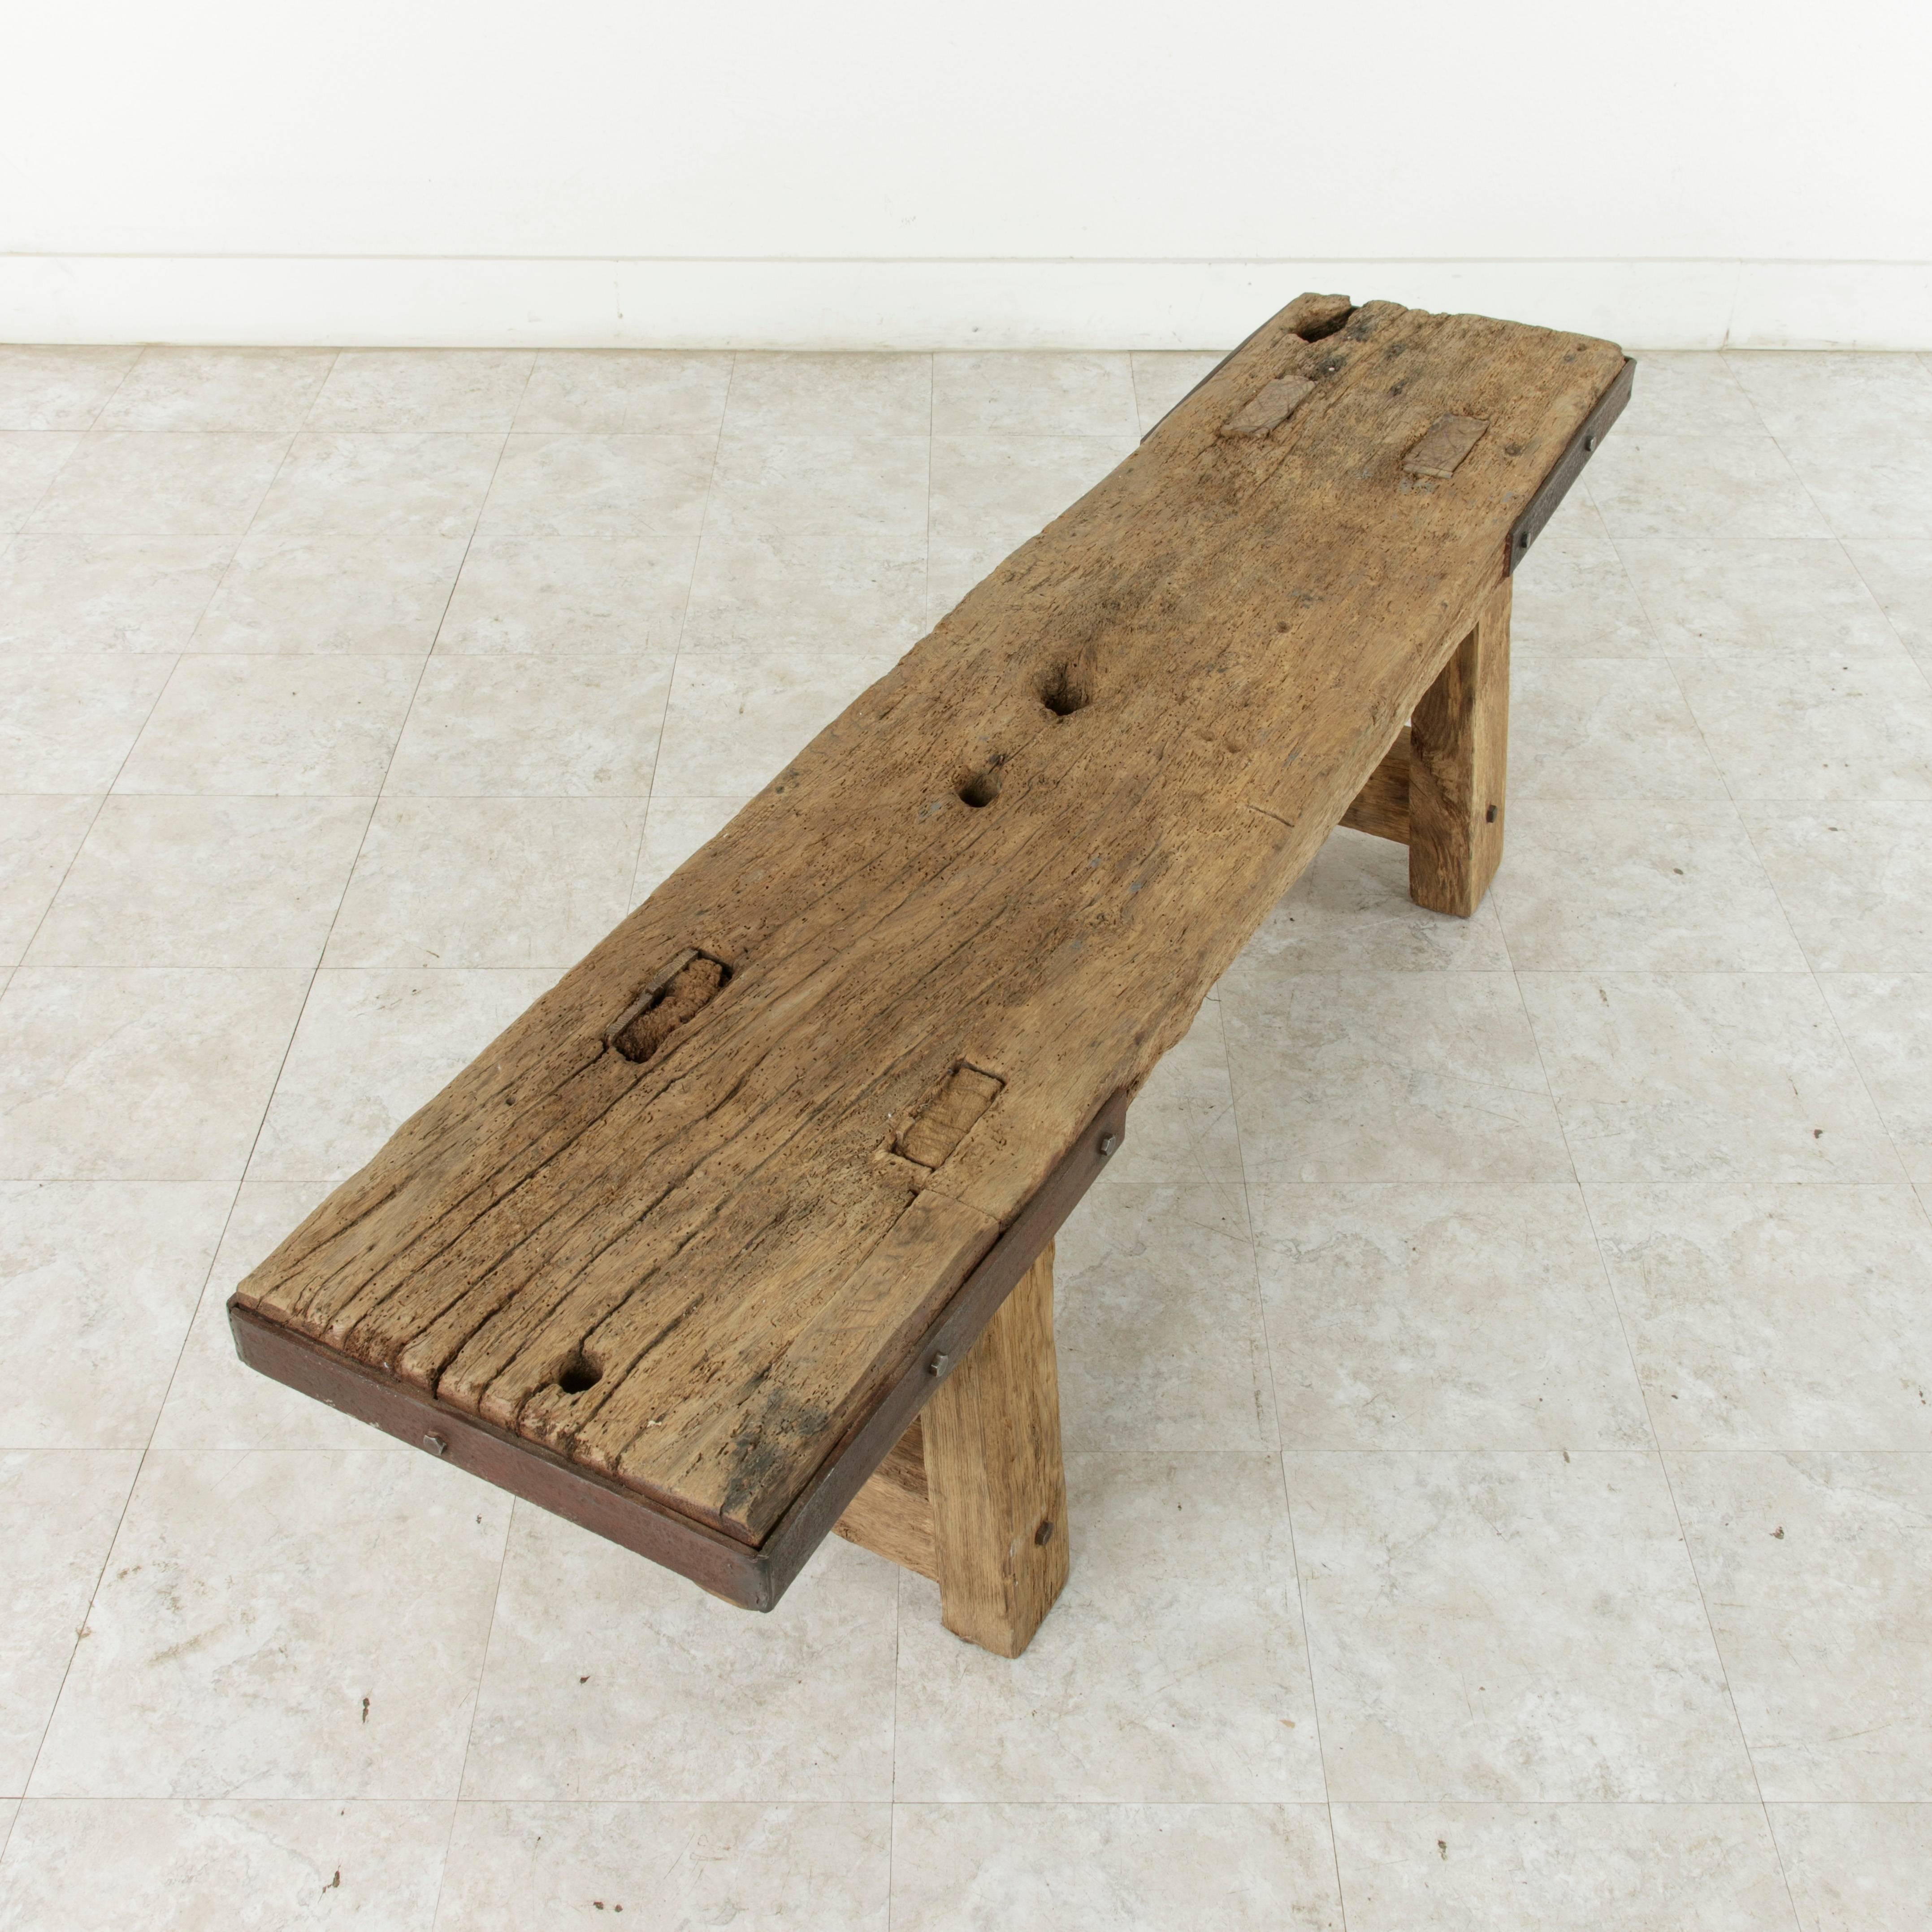 19th Century Long Rustic French Oak Bench in Natural Finish with Iron Corners and Crossbar